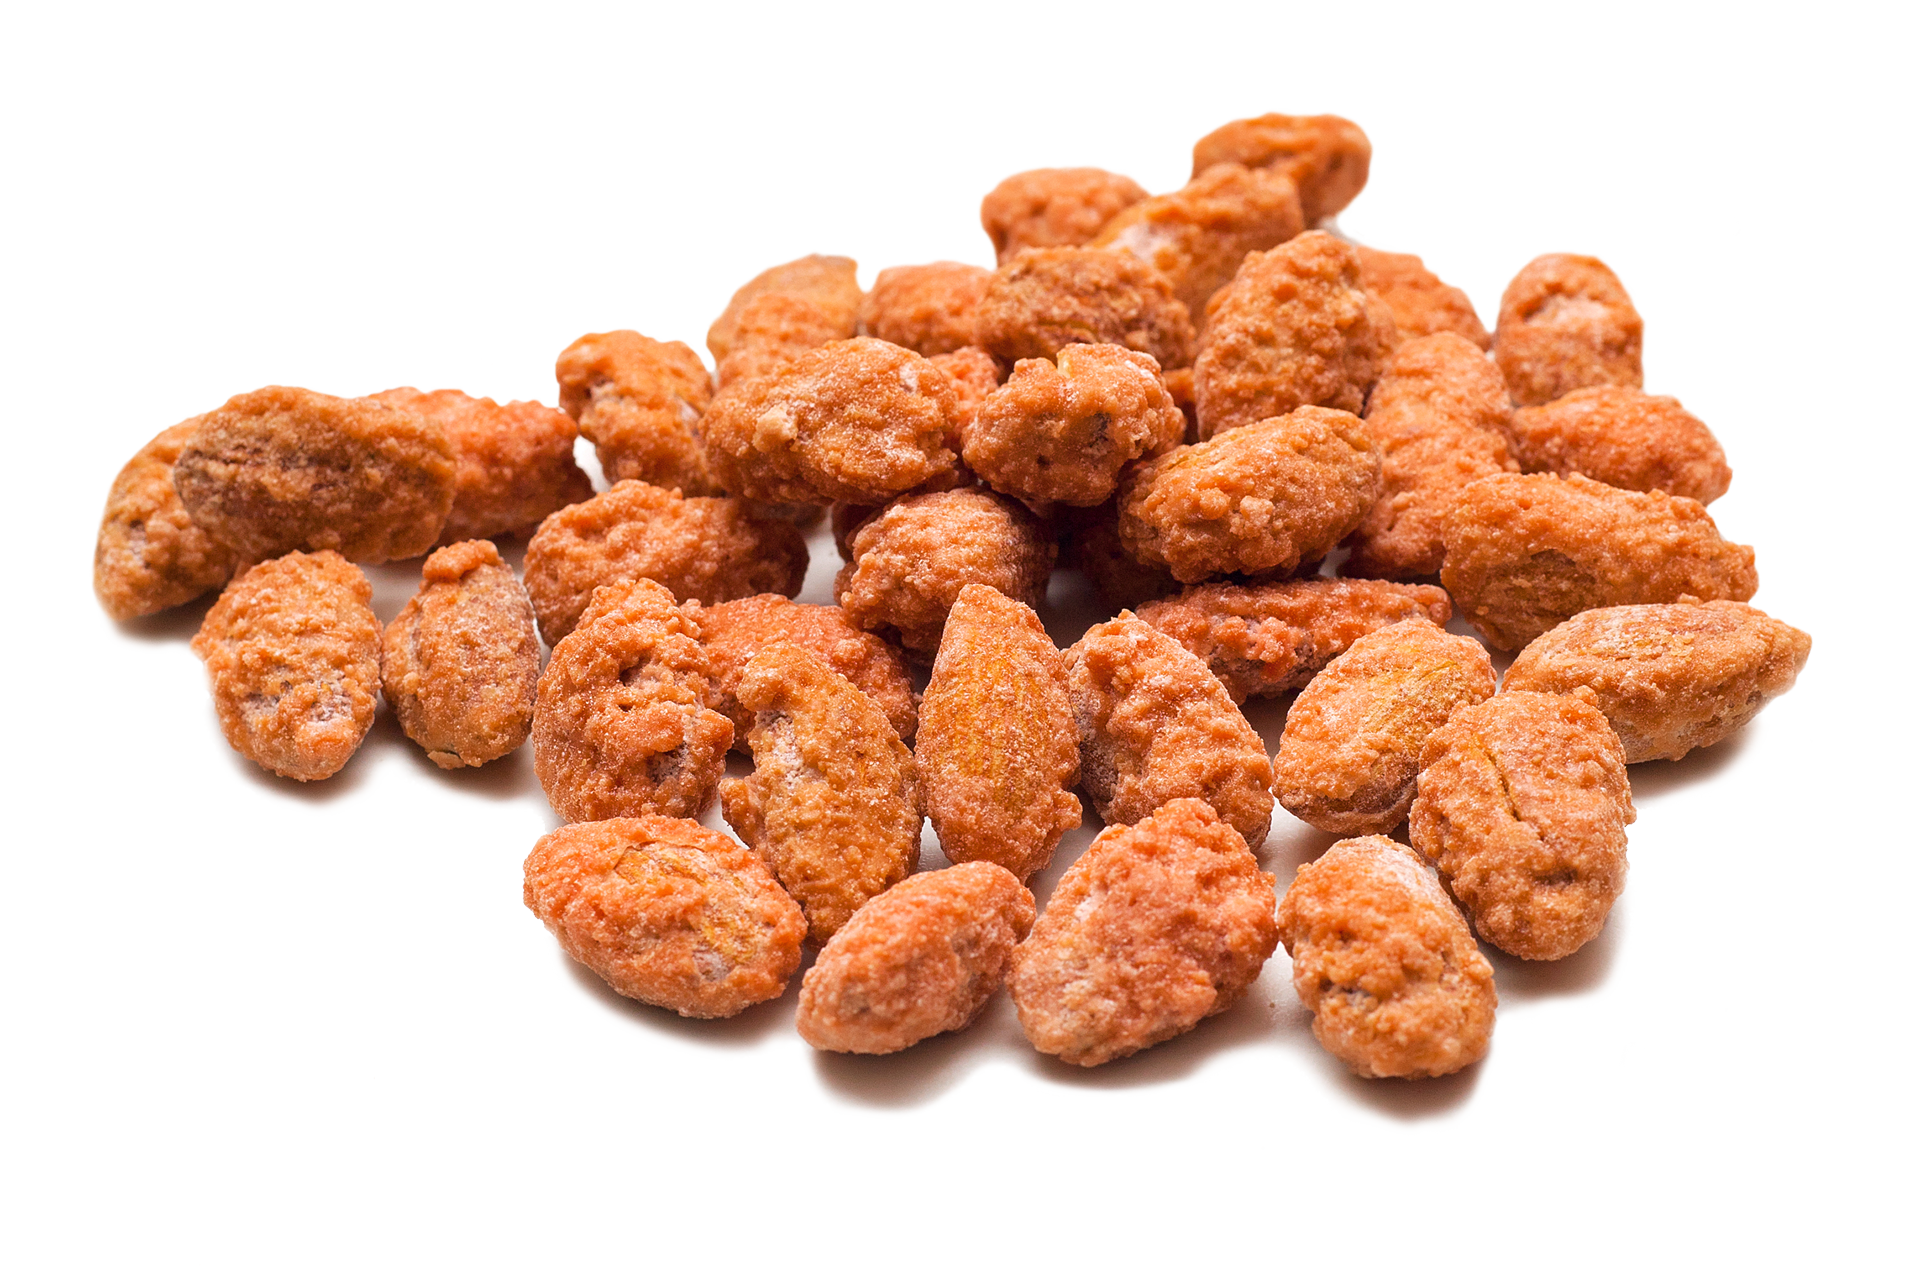 A pile of fried almonds on a white background